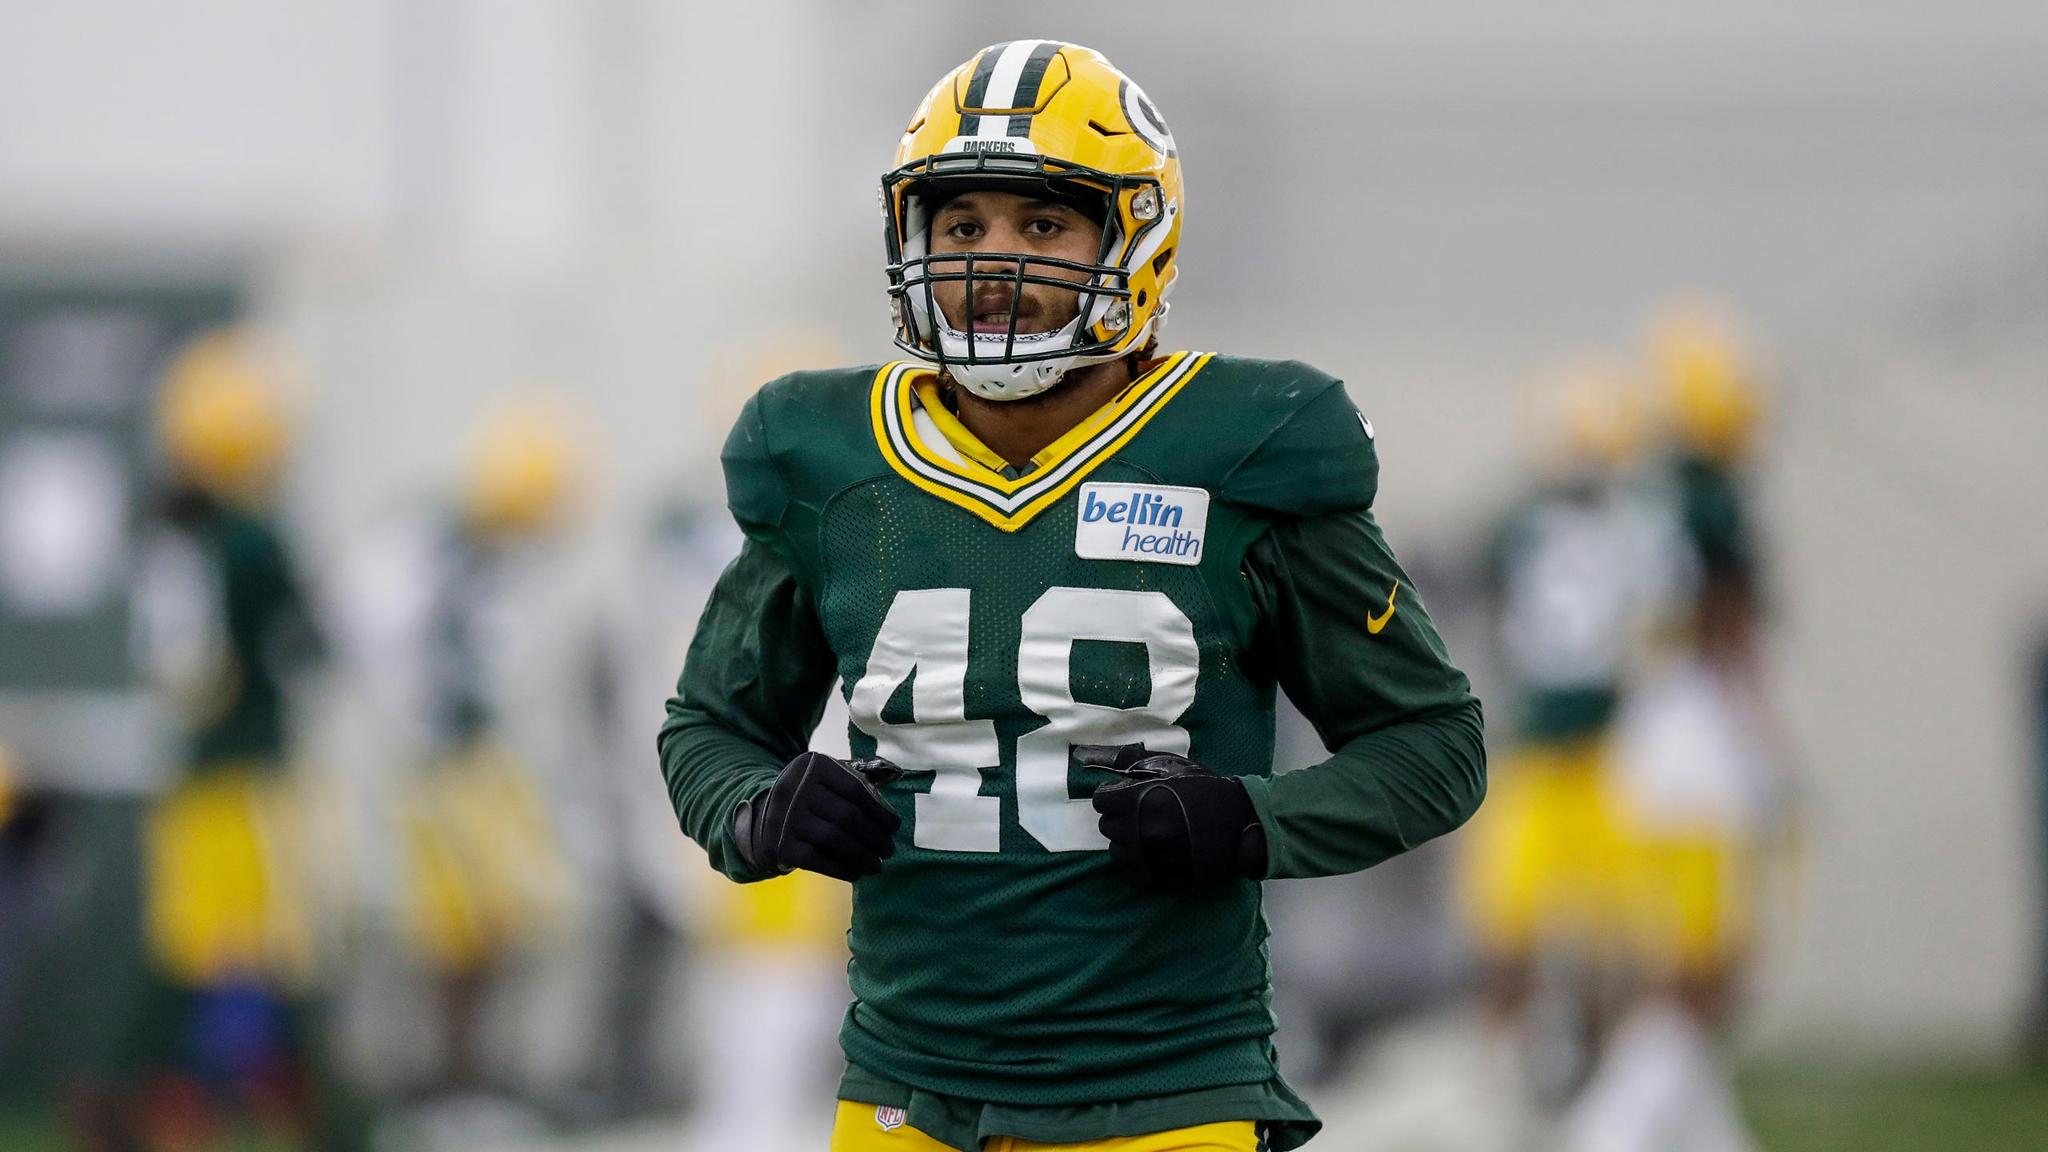 Morrison relishing chance to return to 3-4 with Packers